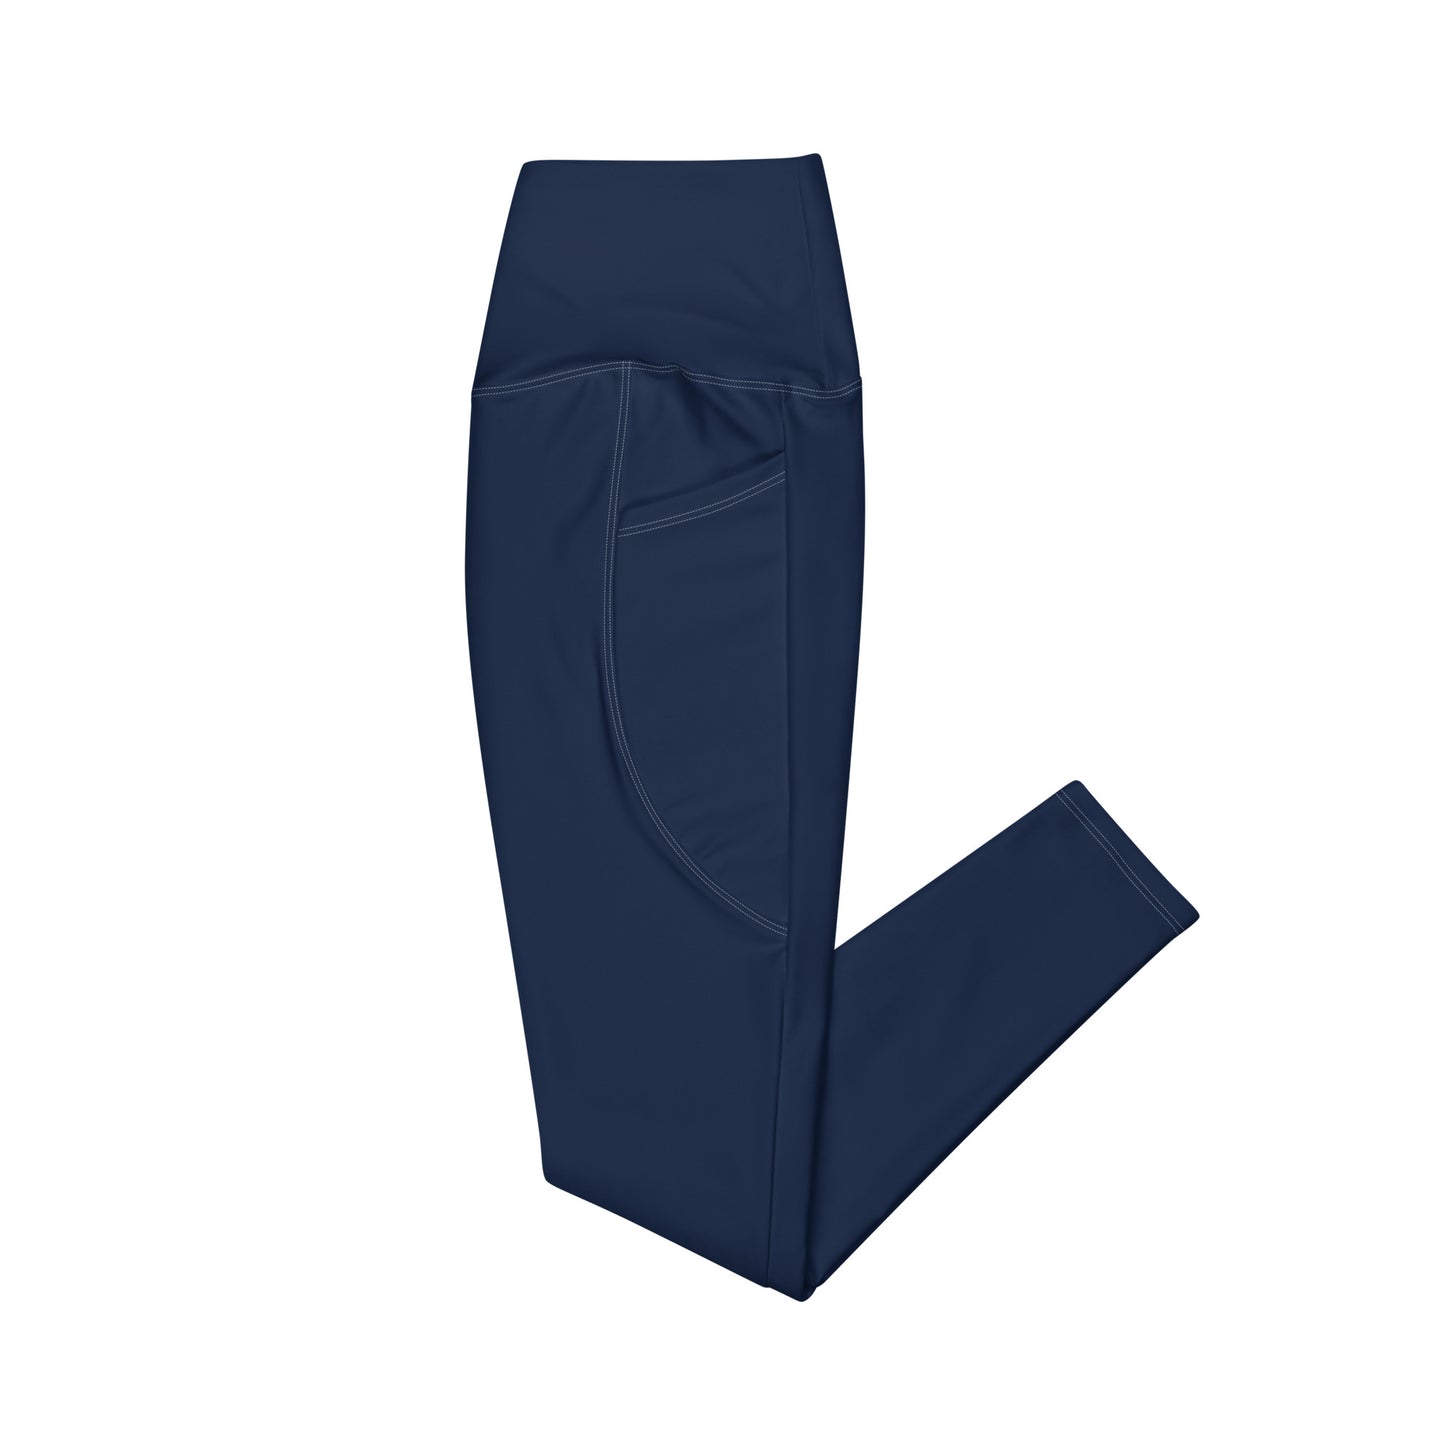 Crossover Leggings with Pockets - Navy